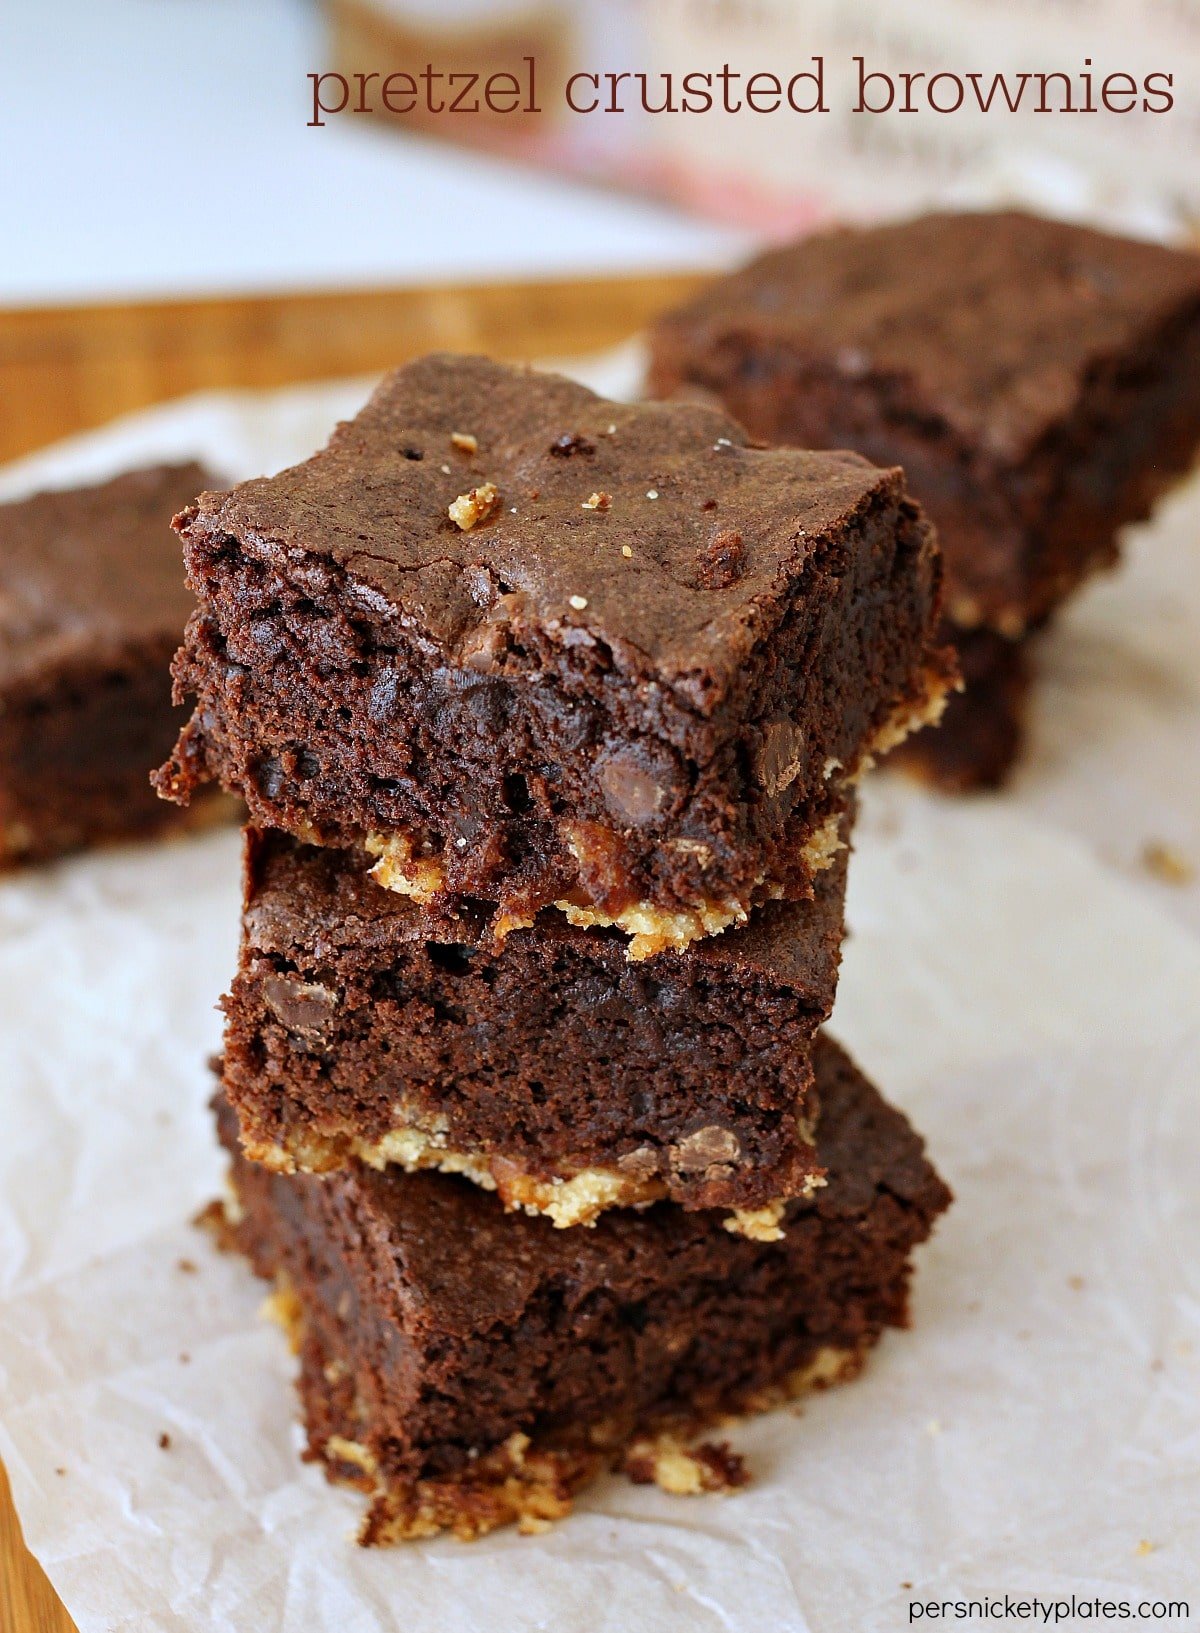 Pretzel Crusted Brownies have a layer of pretzel crust topped with a fudgy chocolate chip brownie. These sweet and salty brownies are a perfect sweet treat! | www.persnicketyplates.com